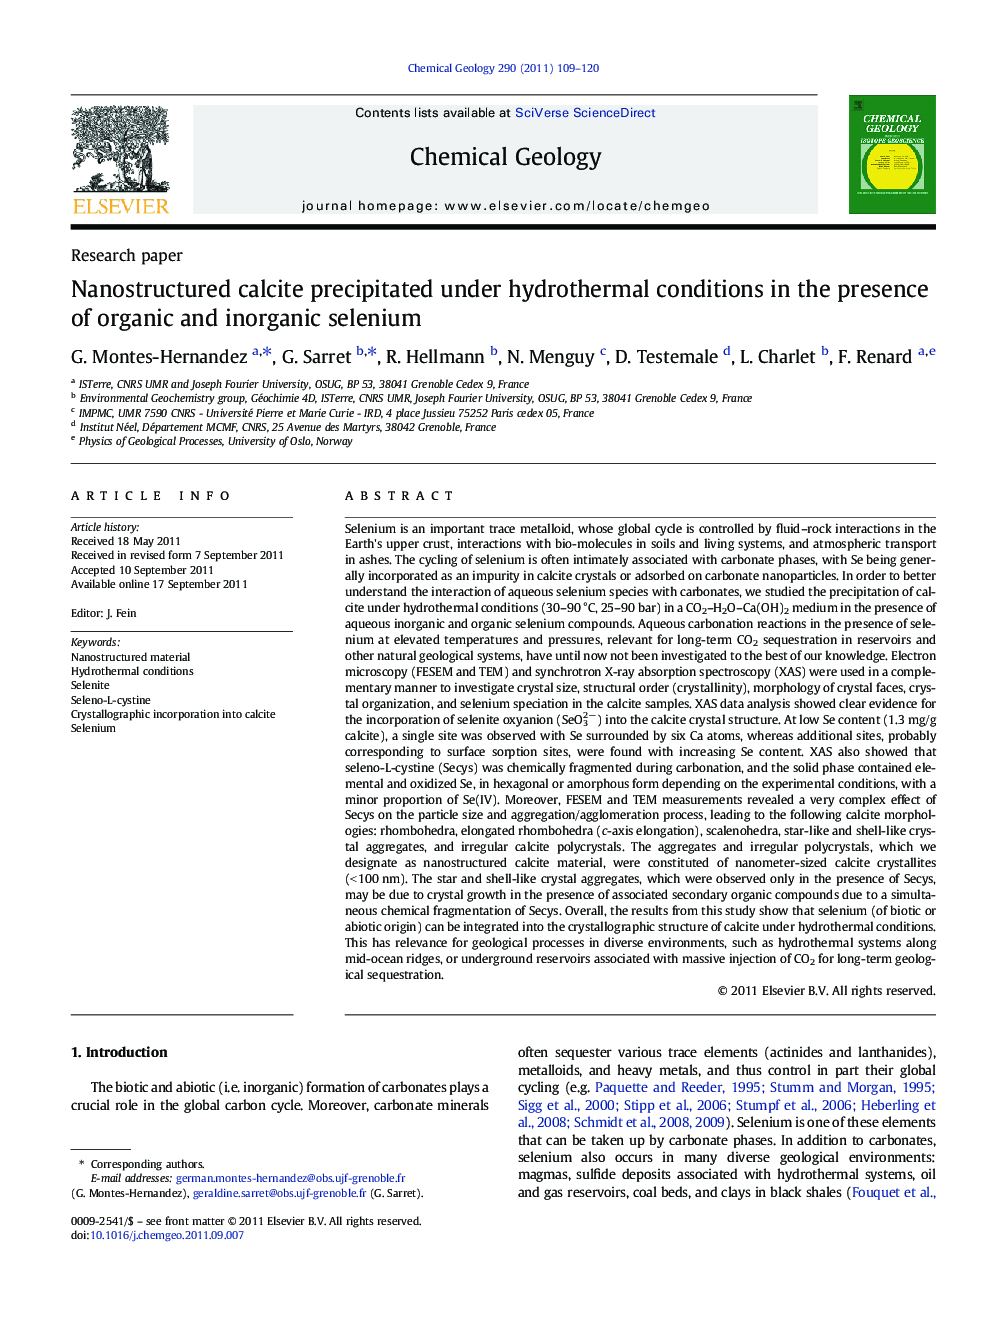 Research paperNanostructured calcite precipitated under hydrothermal conditions in the presence of organic and inorganic selenium